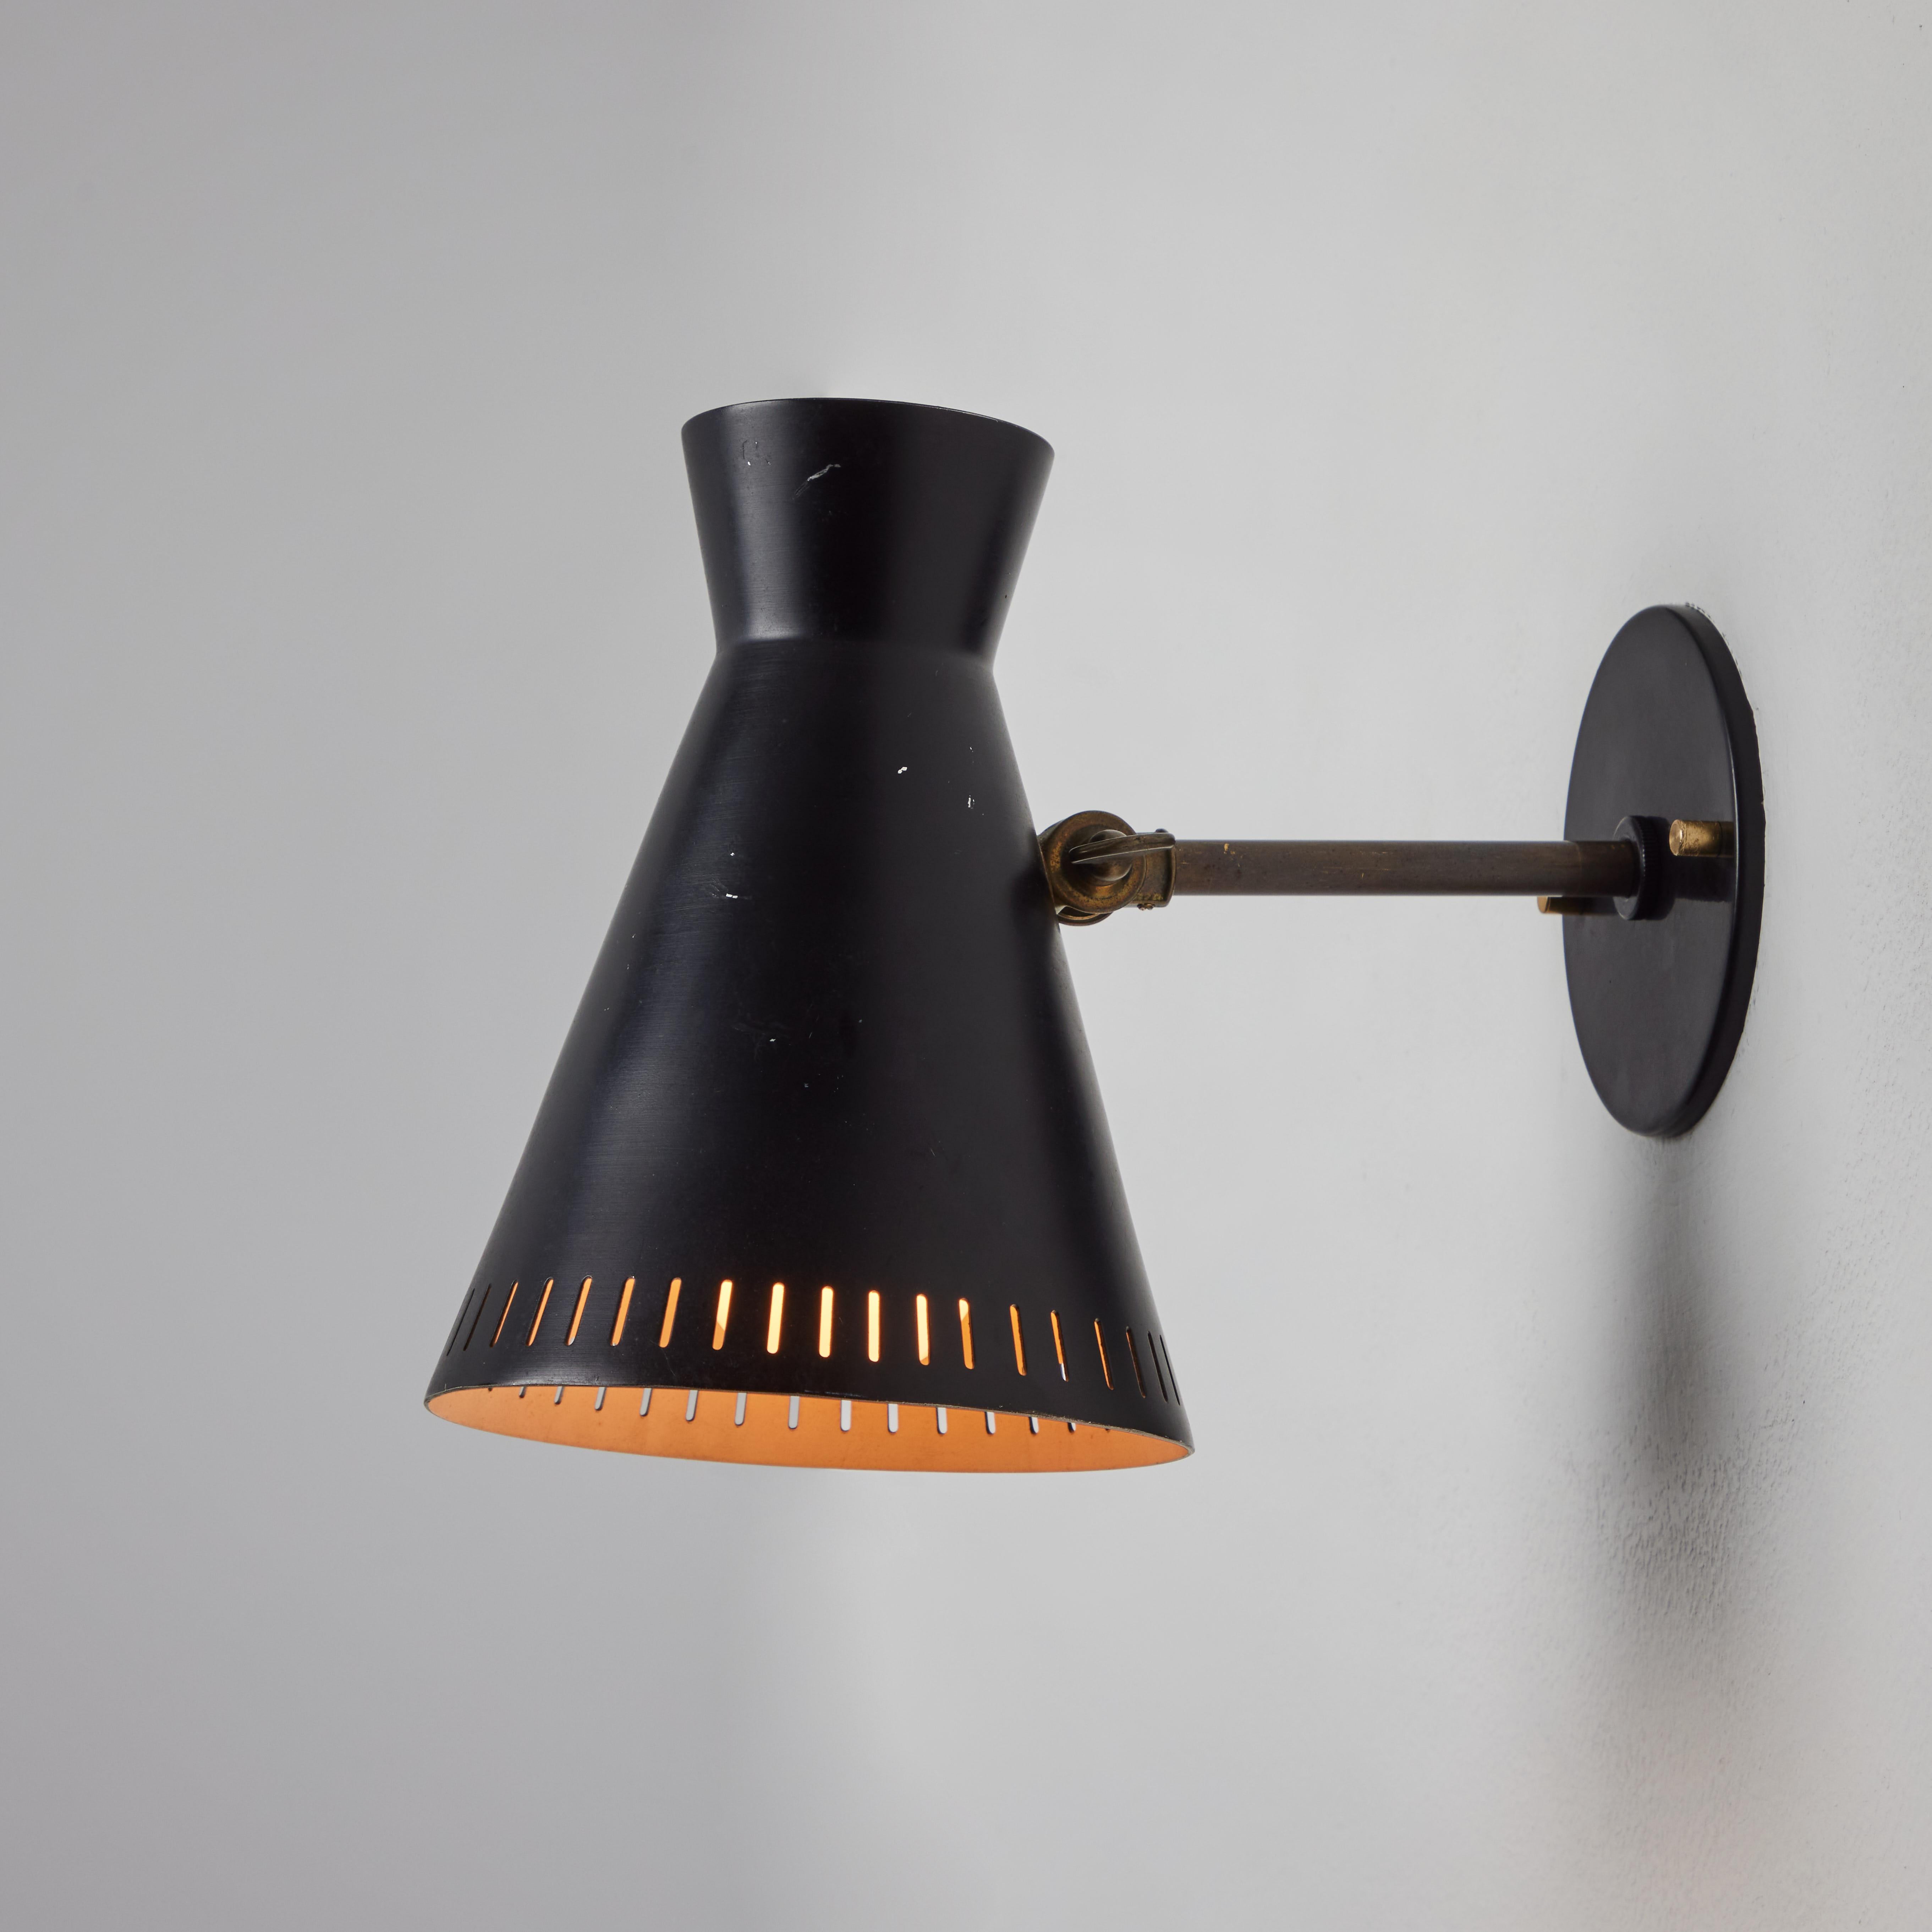 Mid-20th Century 1950s Perforated Black Metal Diabolo Wall Lamp Attributed to Mauri Almari For Sale